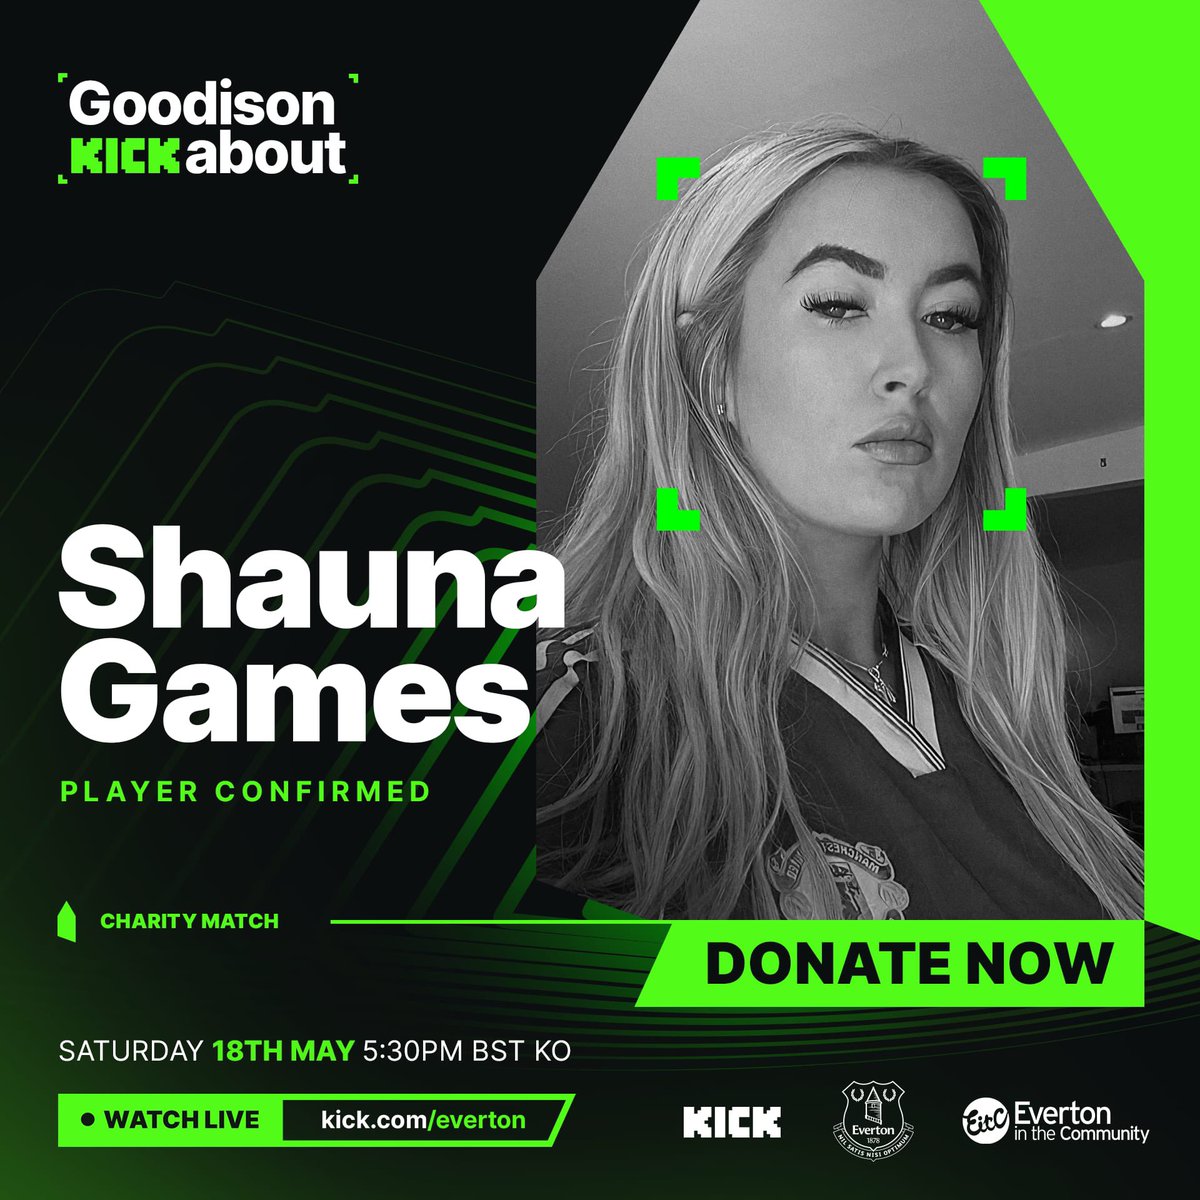 Shaunaldinho is back & I will be playing in #GoodisonKickabout on Saturday 18th May!  

A charity football event at Goodison Park to help raise money for the fantastic @EITC 

Donate now at evertoninthecommunity.org/donate/

You can watch all the action live at 5:30pm on